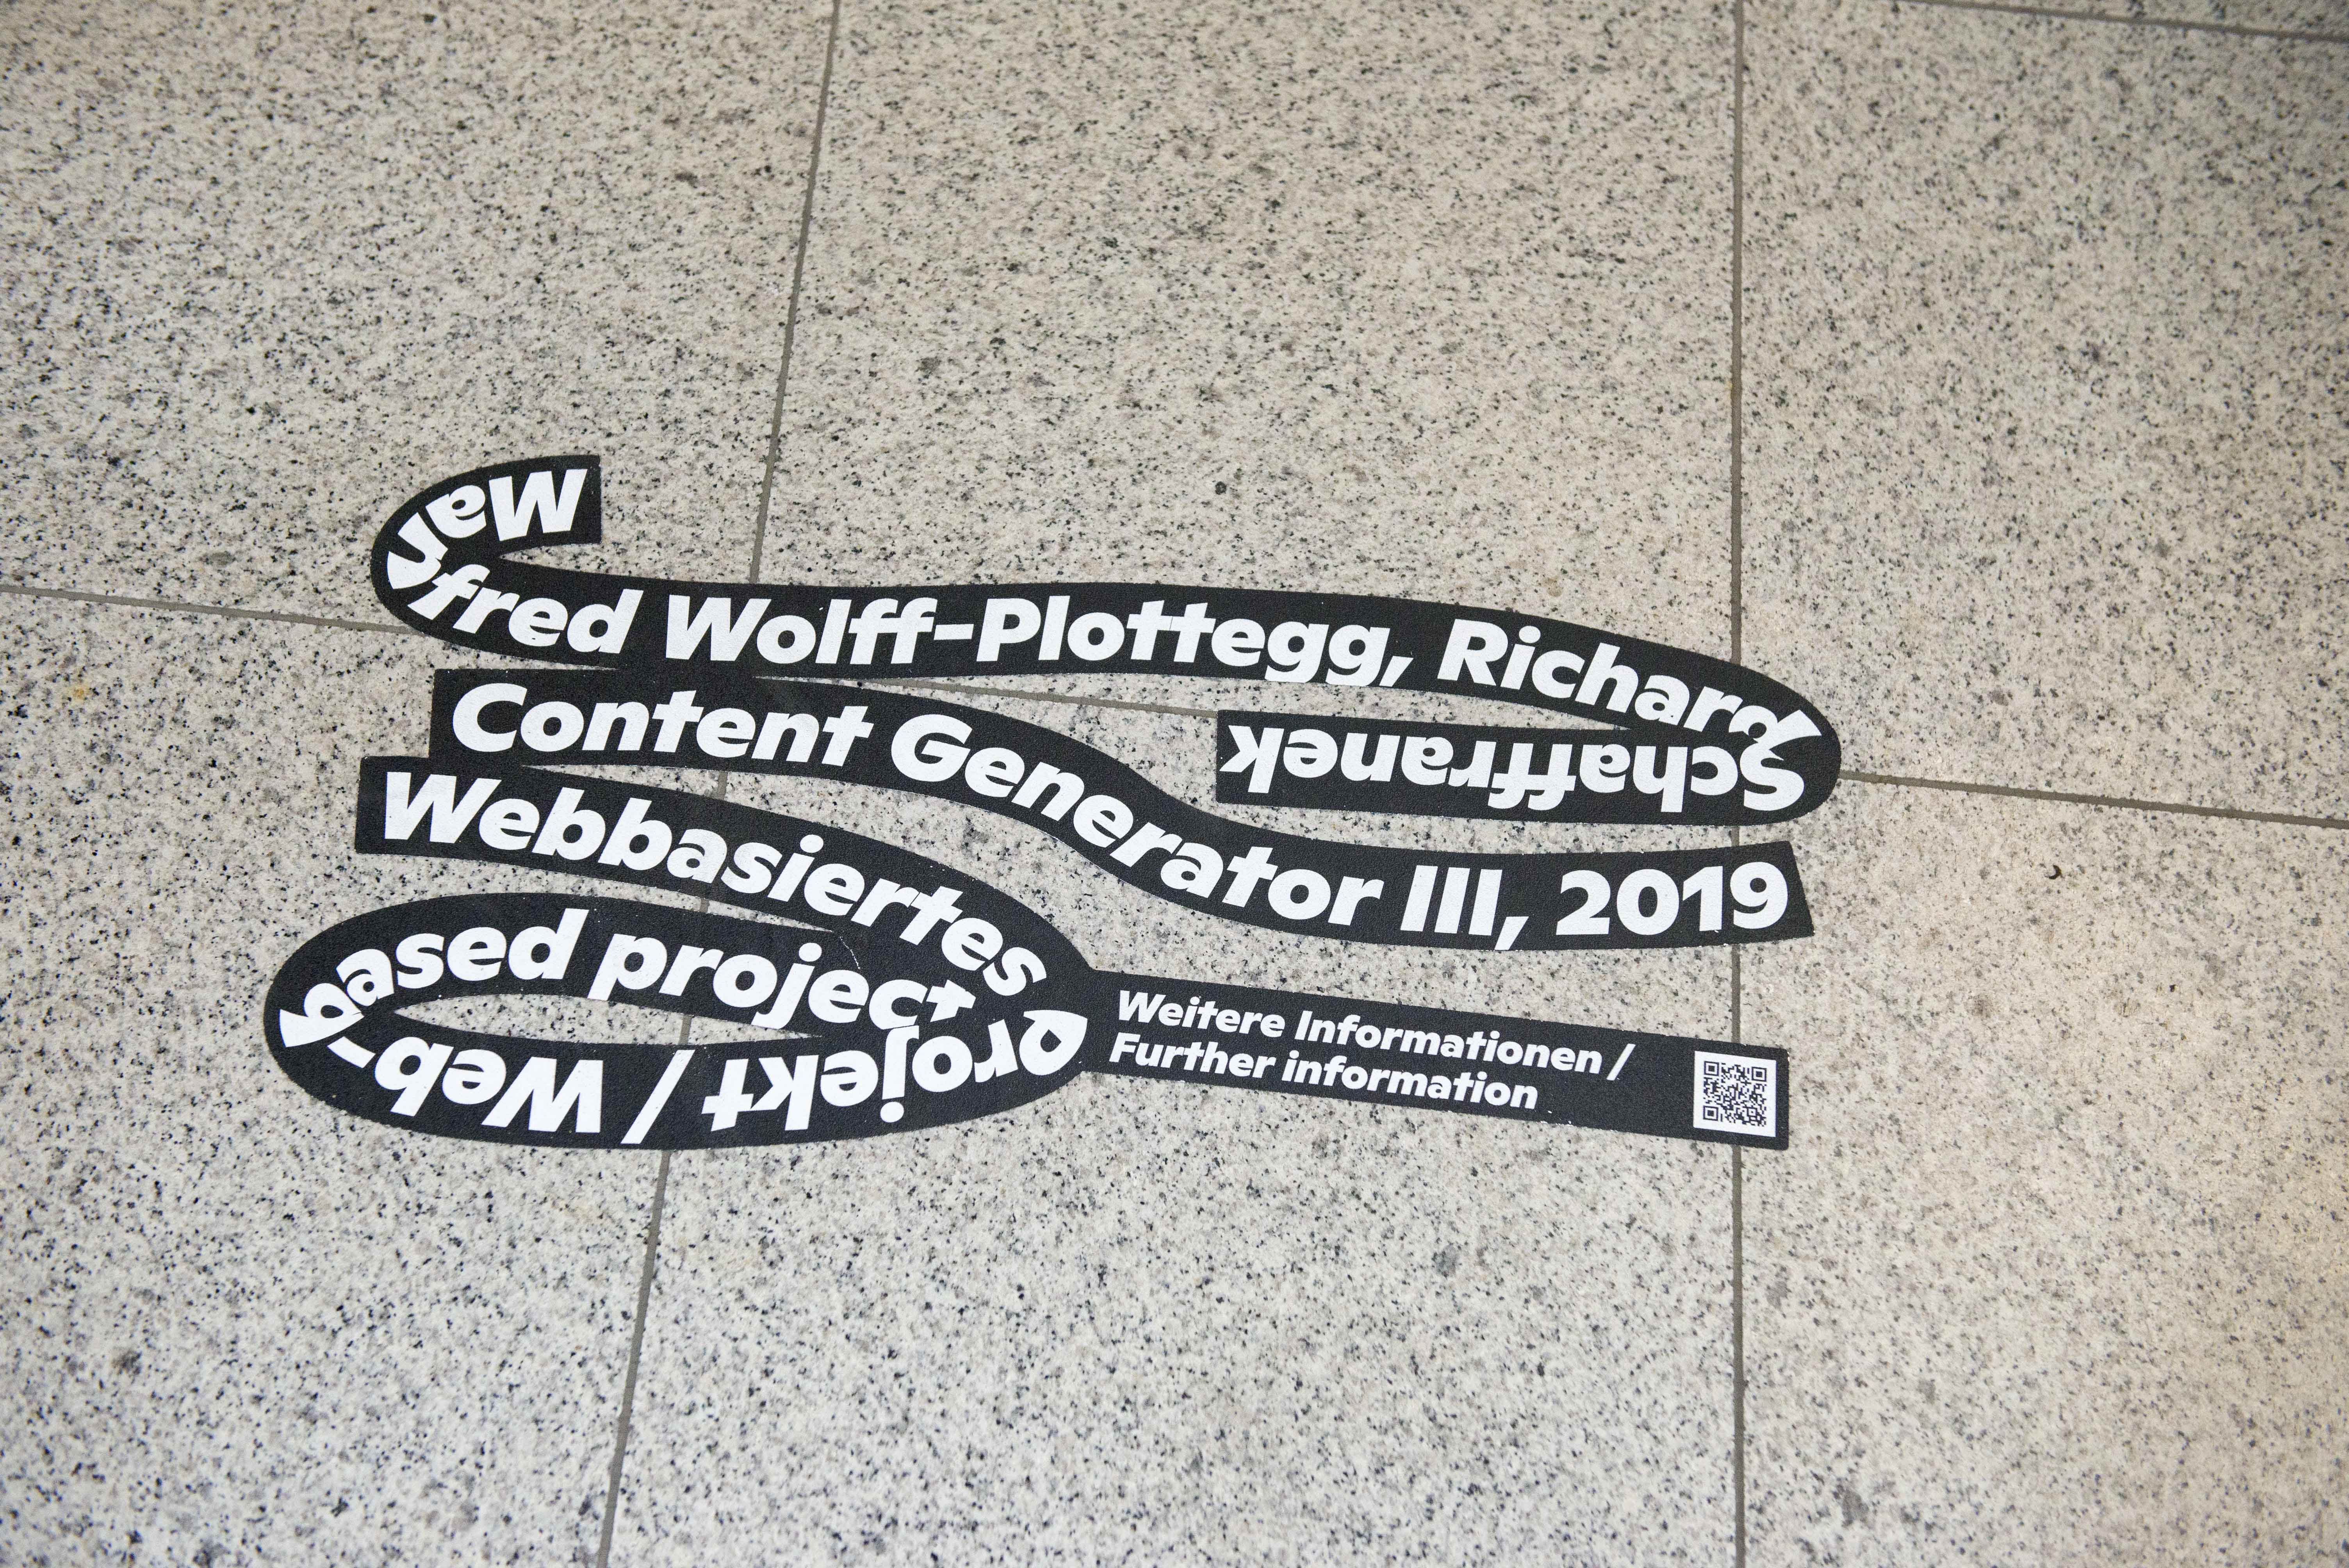 The black loop of the exhibition "Seasons of Media Arts" sticks to a tiled floor, with white writing over the artwork Content Generator III. 